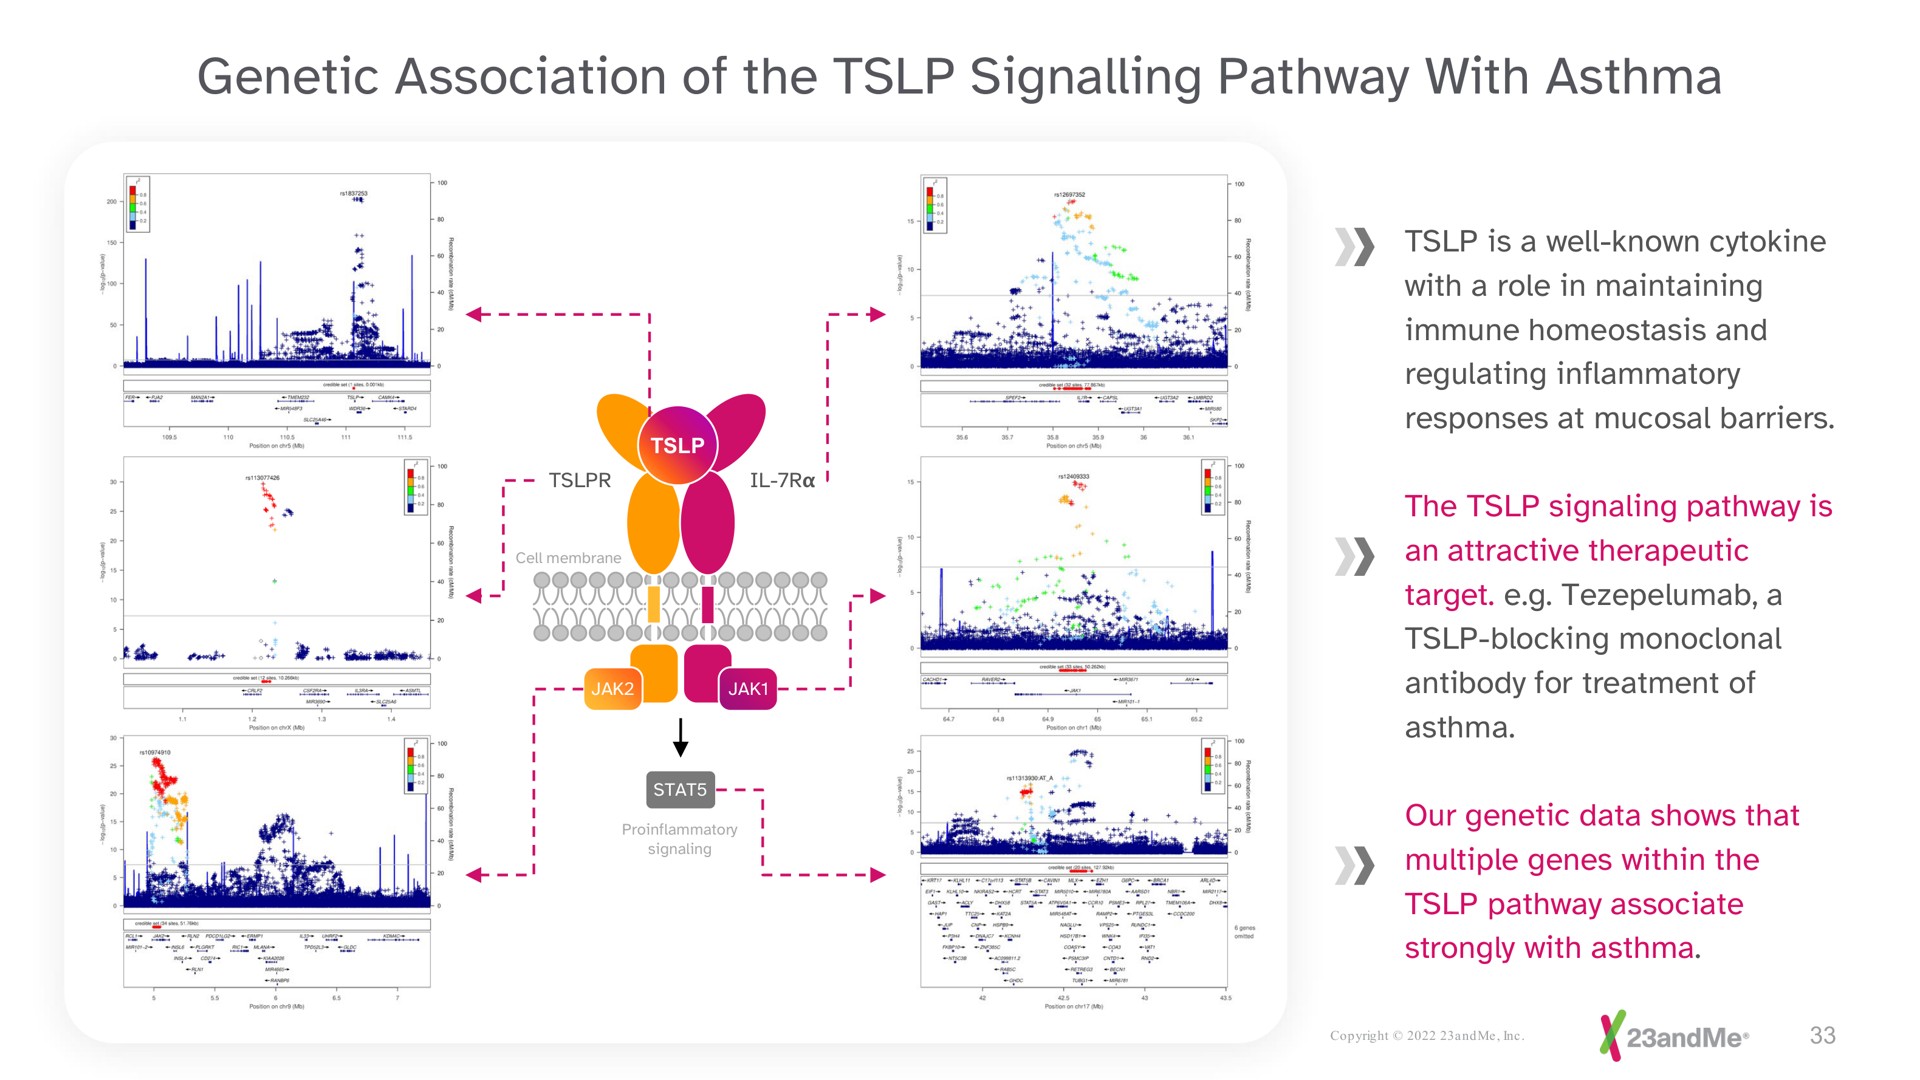 genetic association of the signalling pathway with asthma | 23andMe